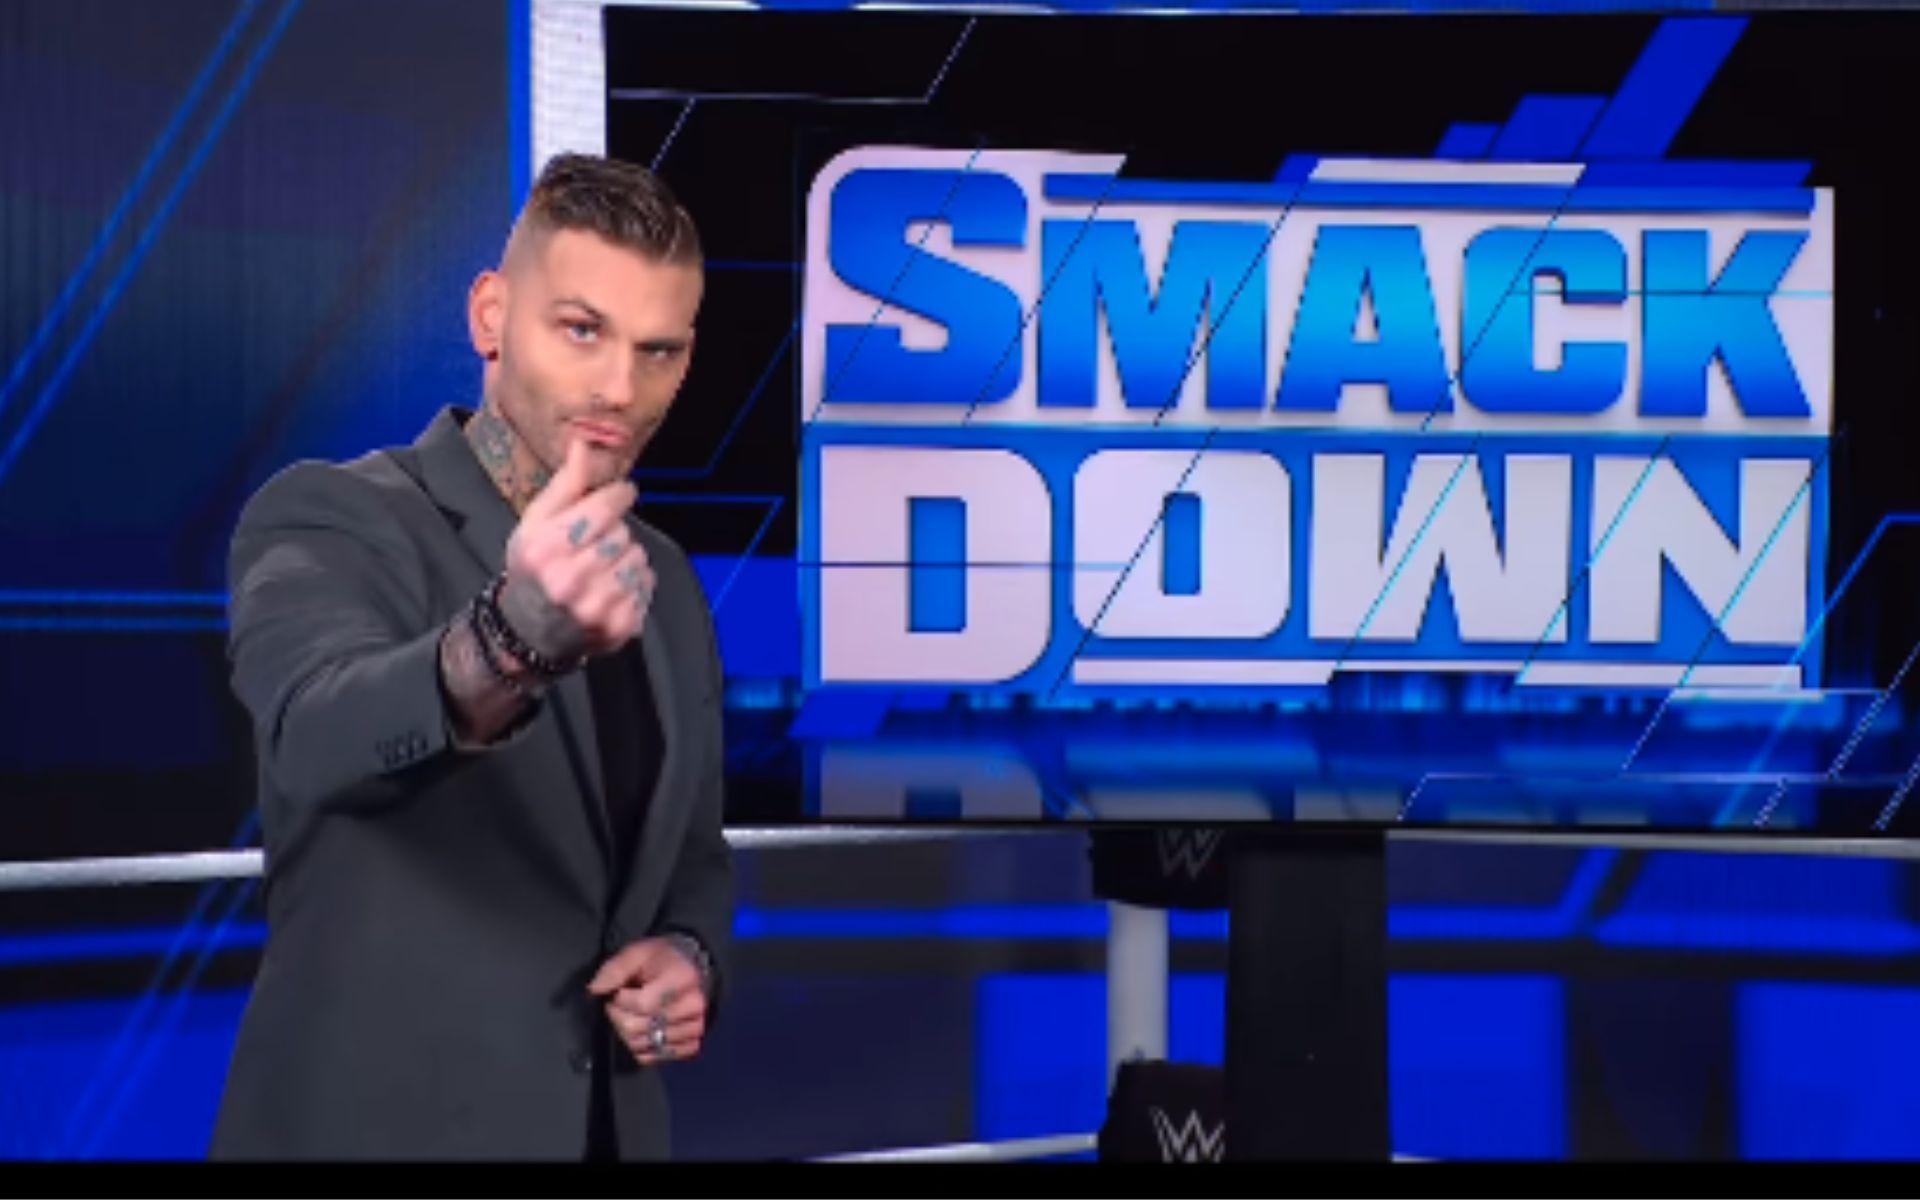 Many fans will agree with what the voice of SmackDown had to say